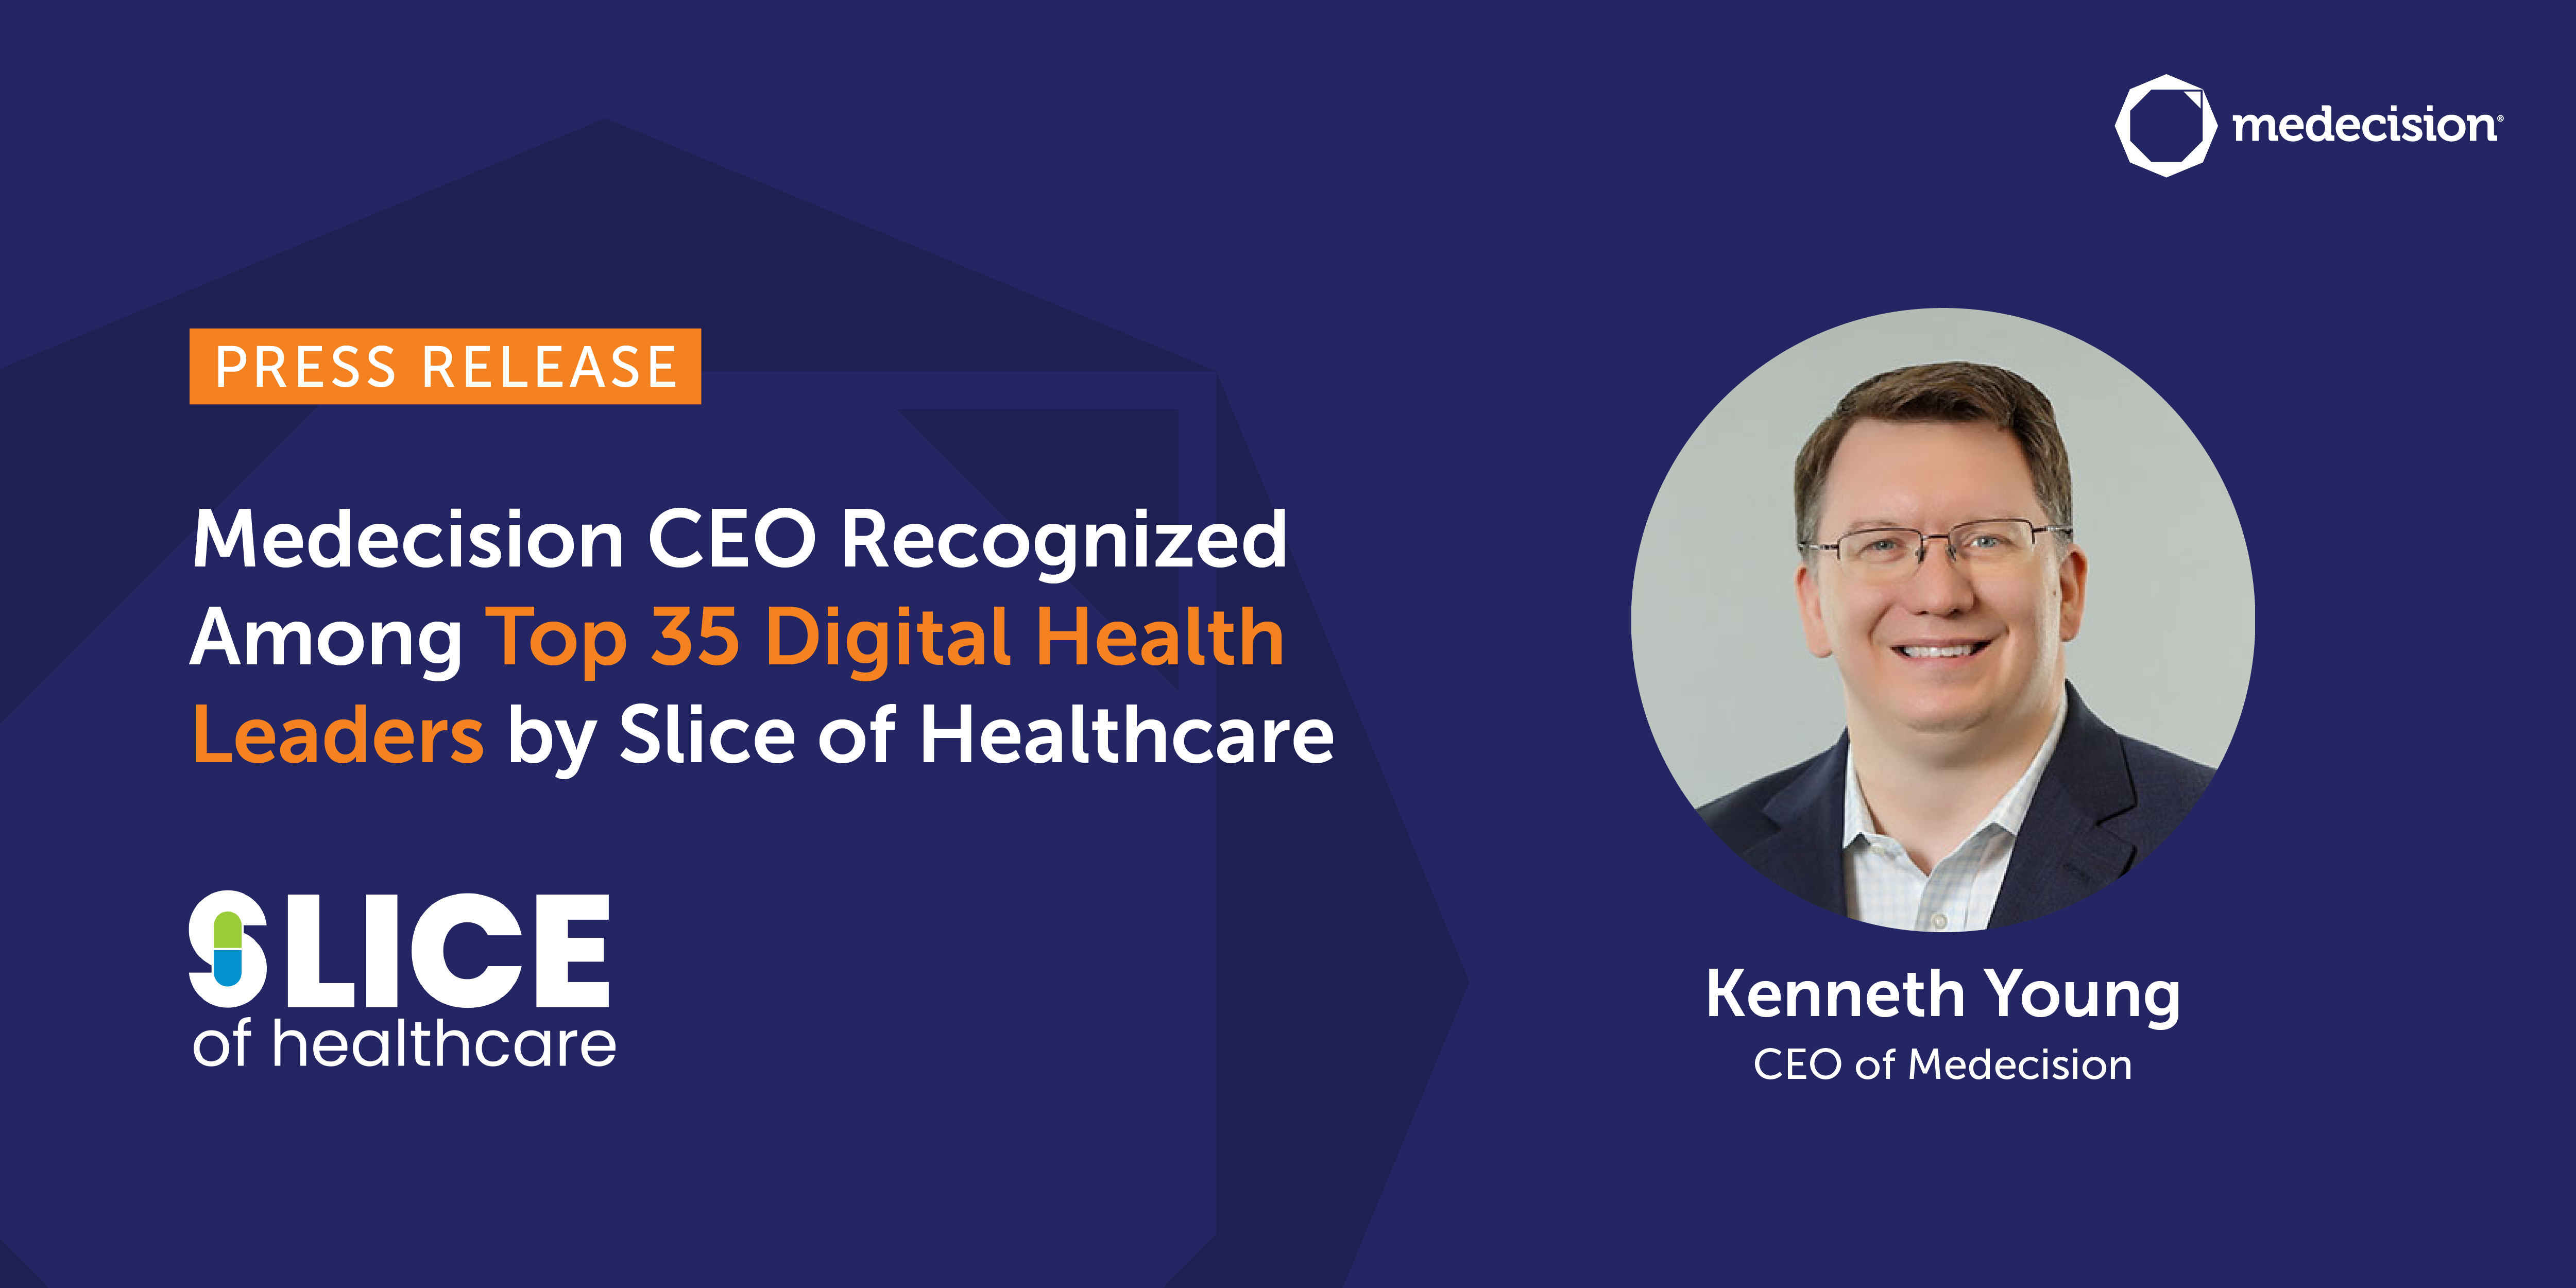 Medecision CEO Recognized Among Top 35 Digital Health Leaders by Slice of Healthcare